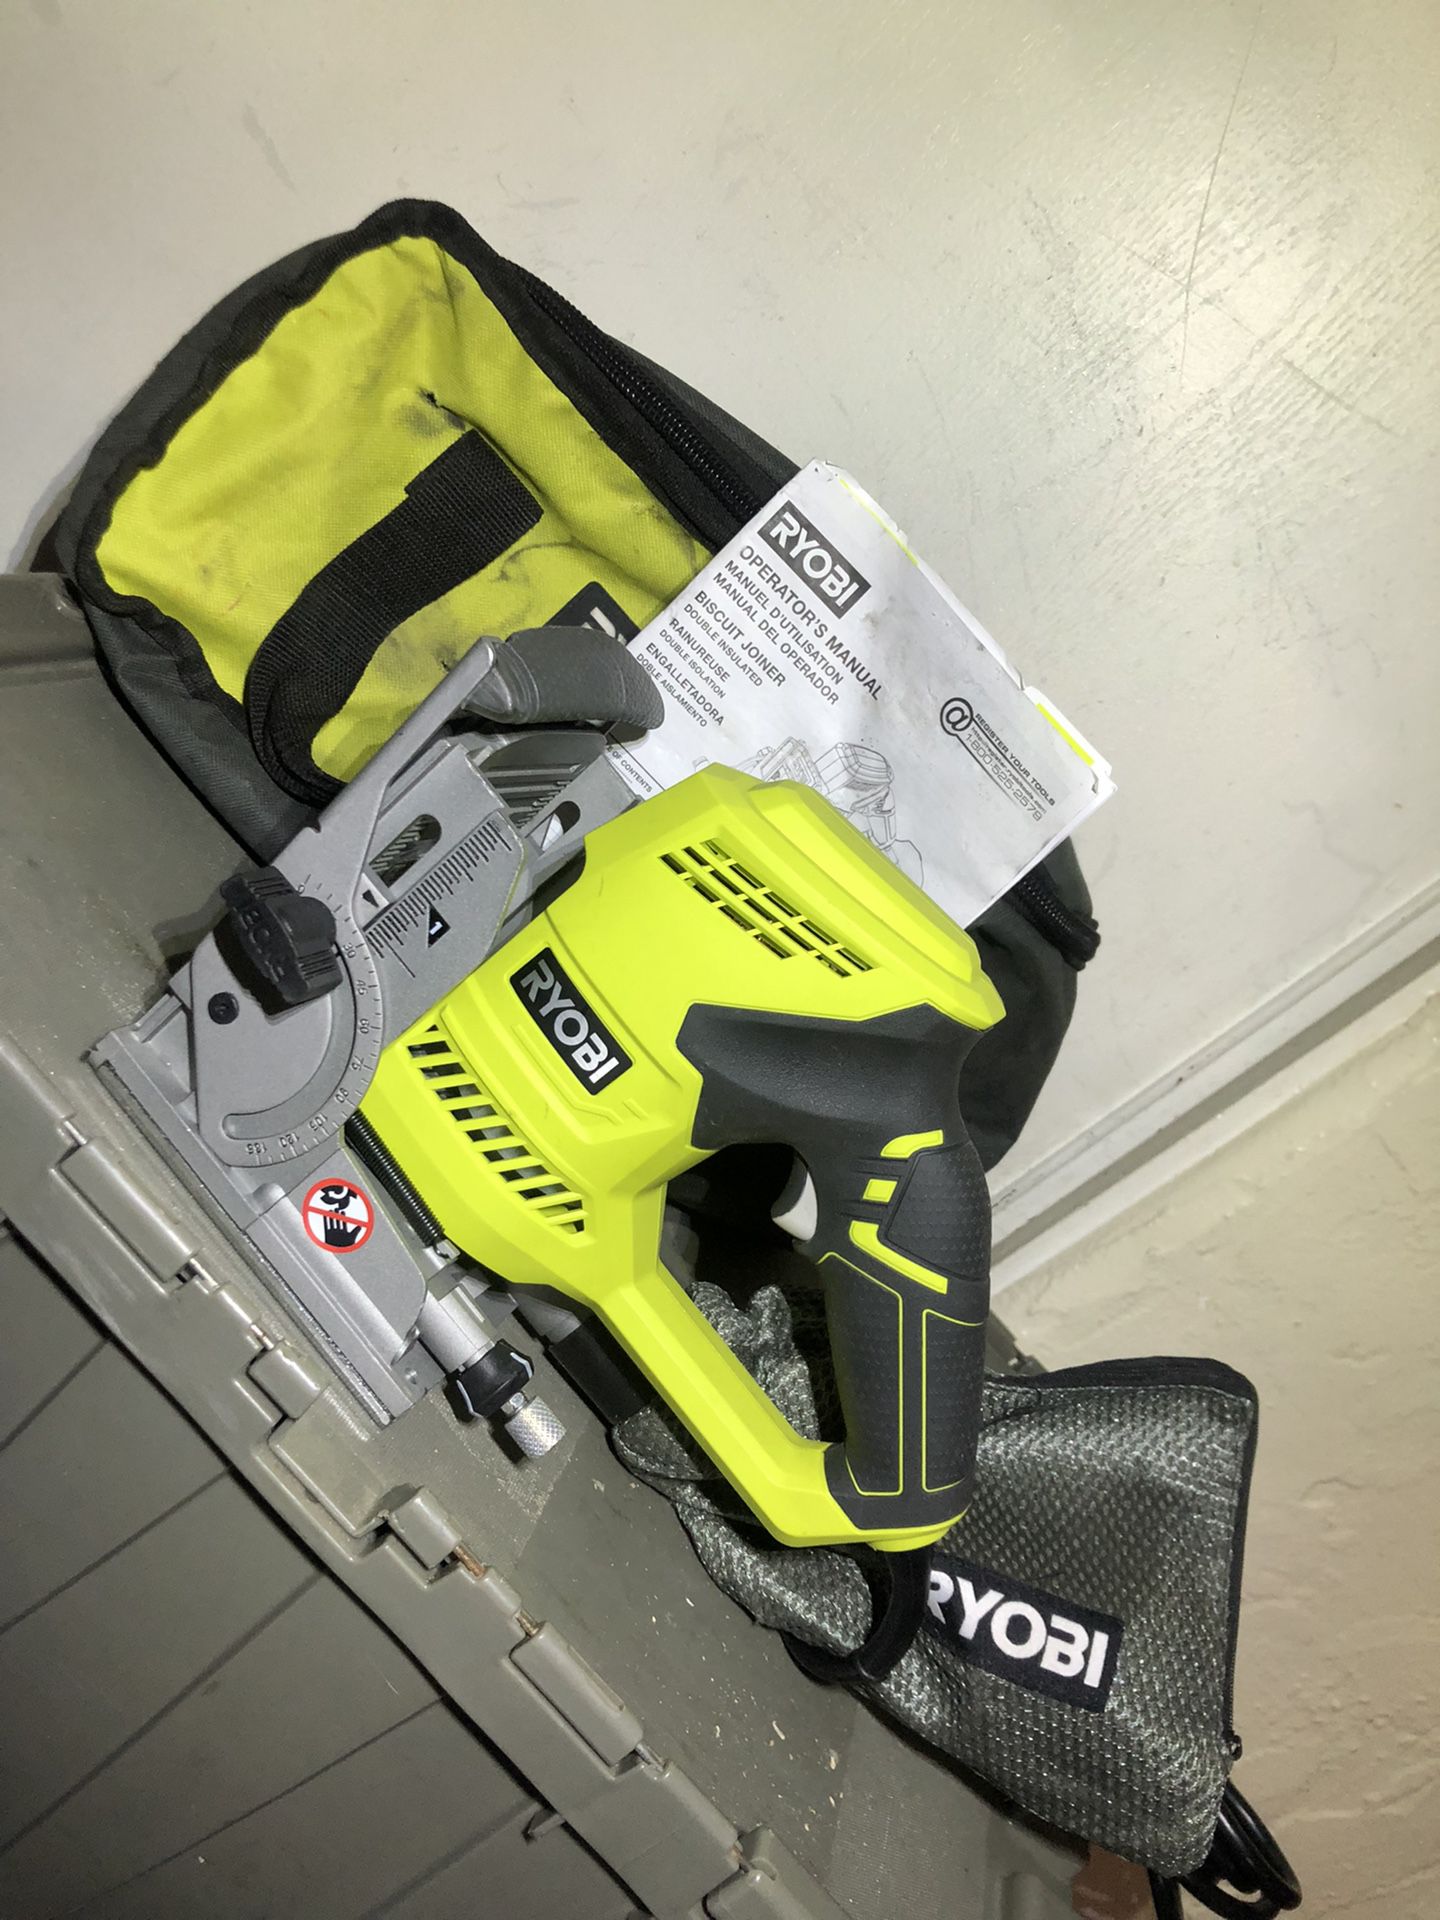 RYOBI Amp Corded AC Biscuit Joiner Kit with Dust Collector and Bag for  Sale in South Gate, CA OfferUp